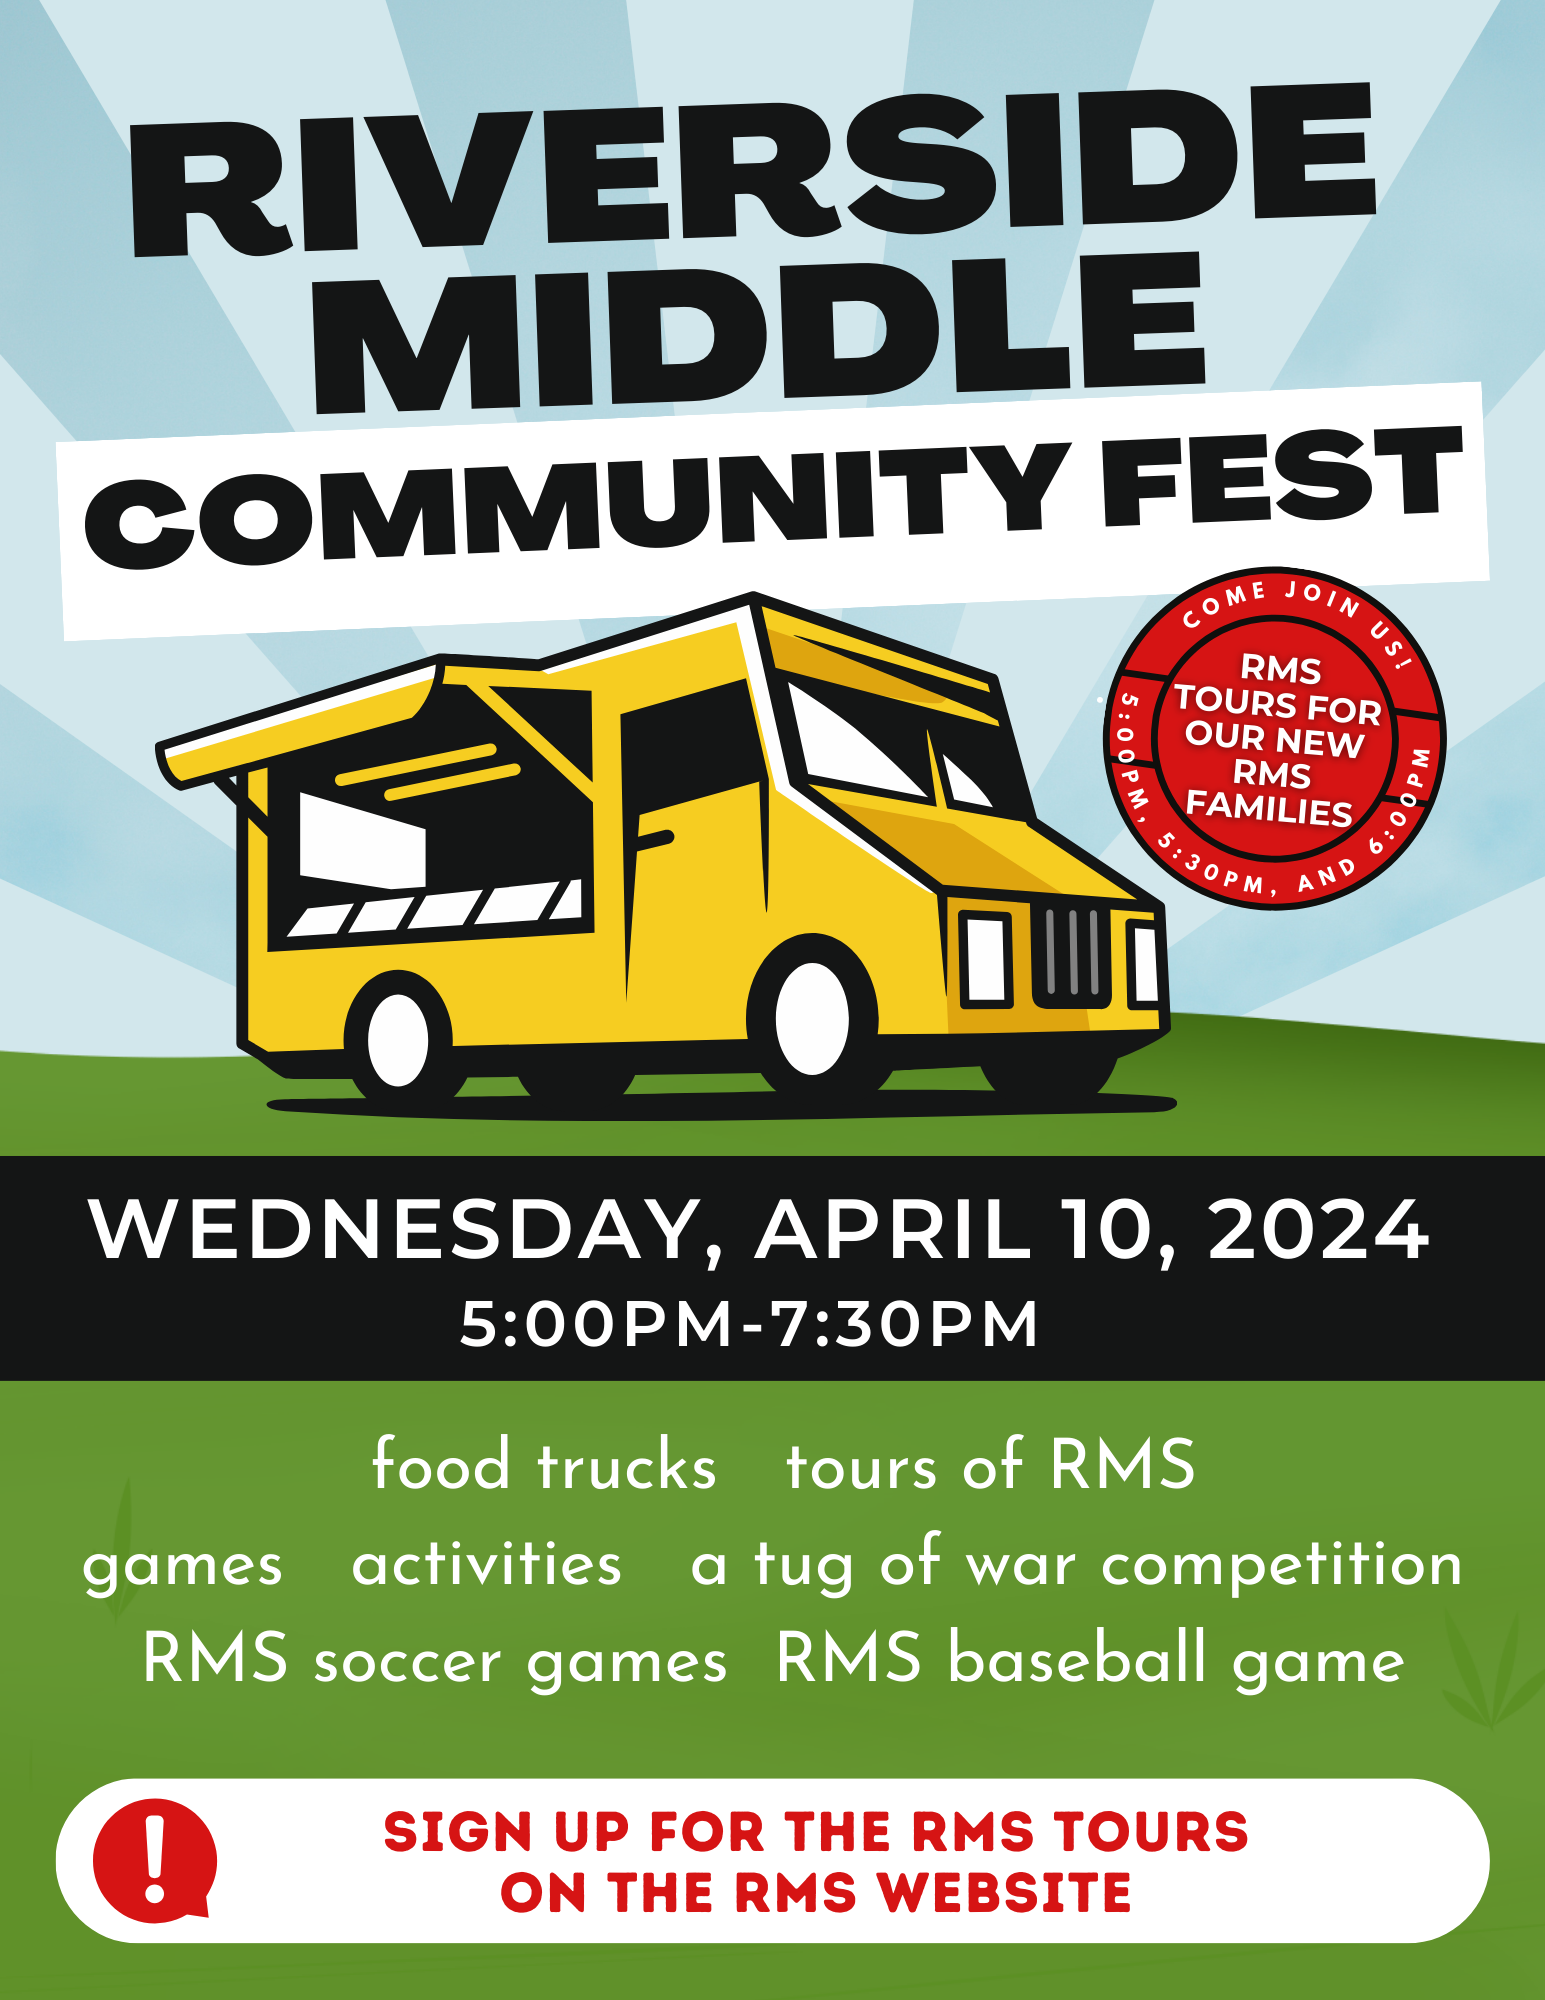 Riverside Middle Community Fest Thursday, April 13, 2024 5:00-7:00PM Food trucks tours of RMS games activities a tug of war competition free child Id kits RMS soccer games RMS softball game RMS baseball game Sign up for the RMS tours on the RMS website